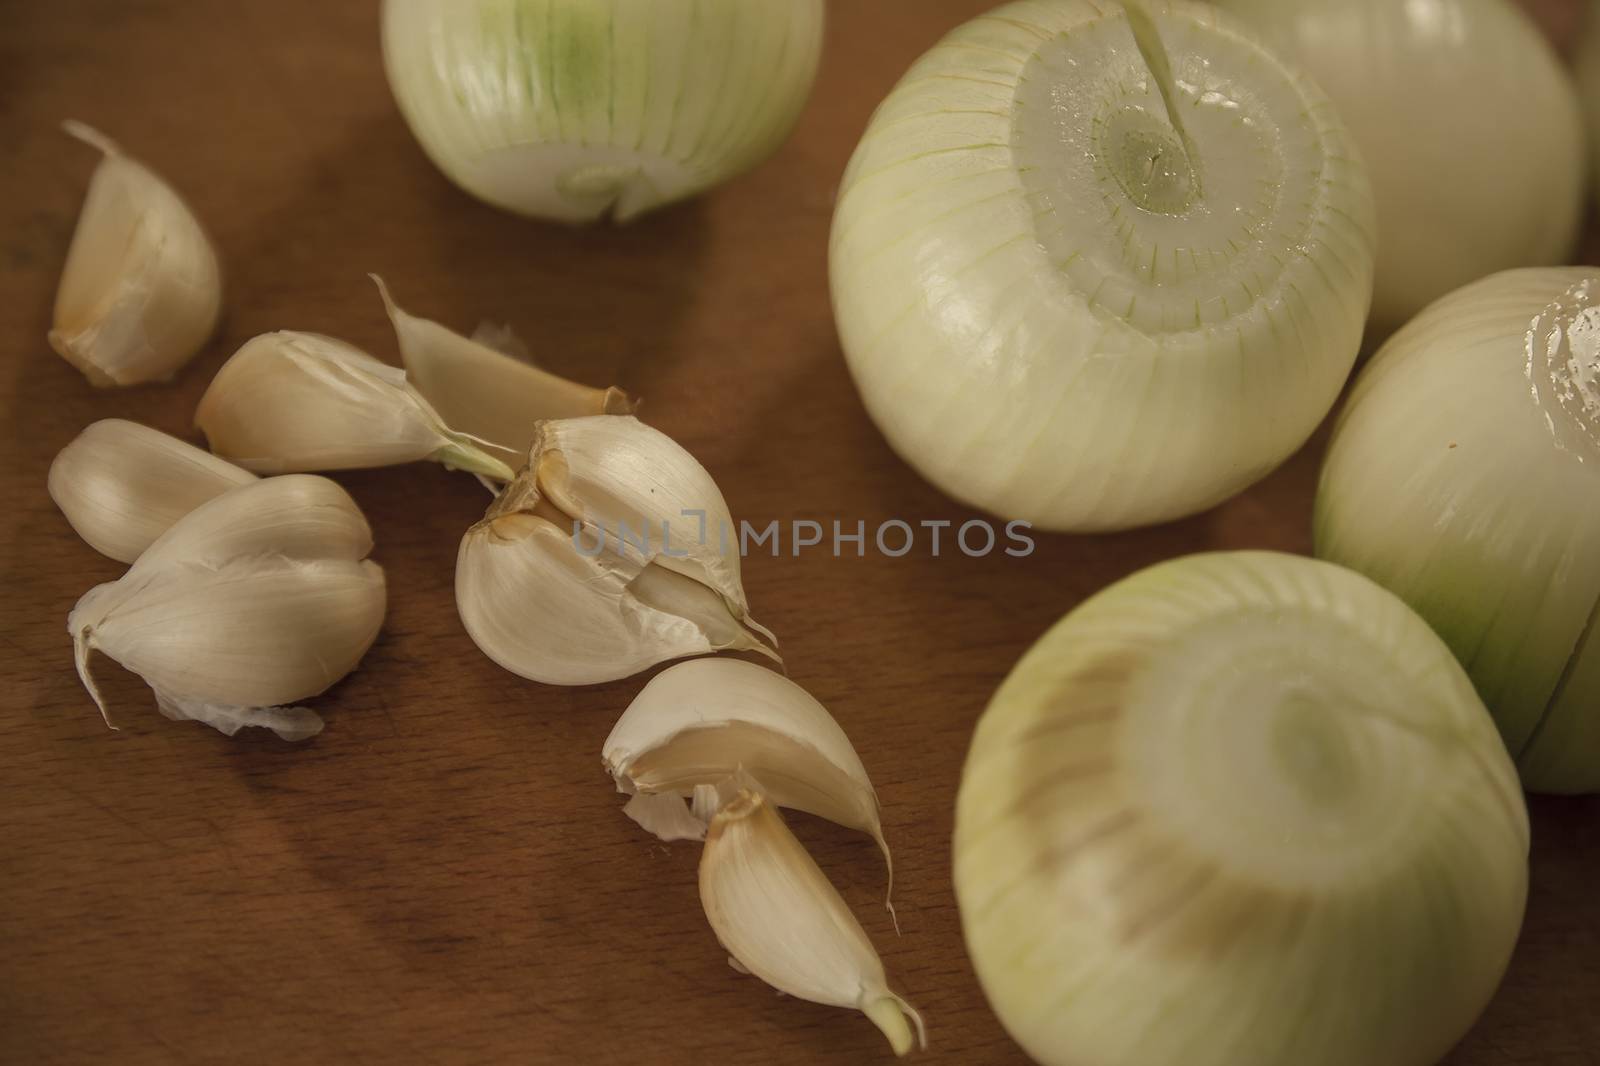 Garlic and onions on wooden board, prepared for cooking.